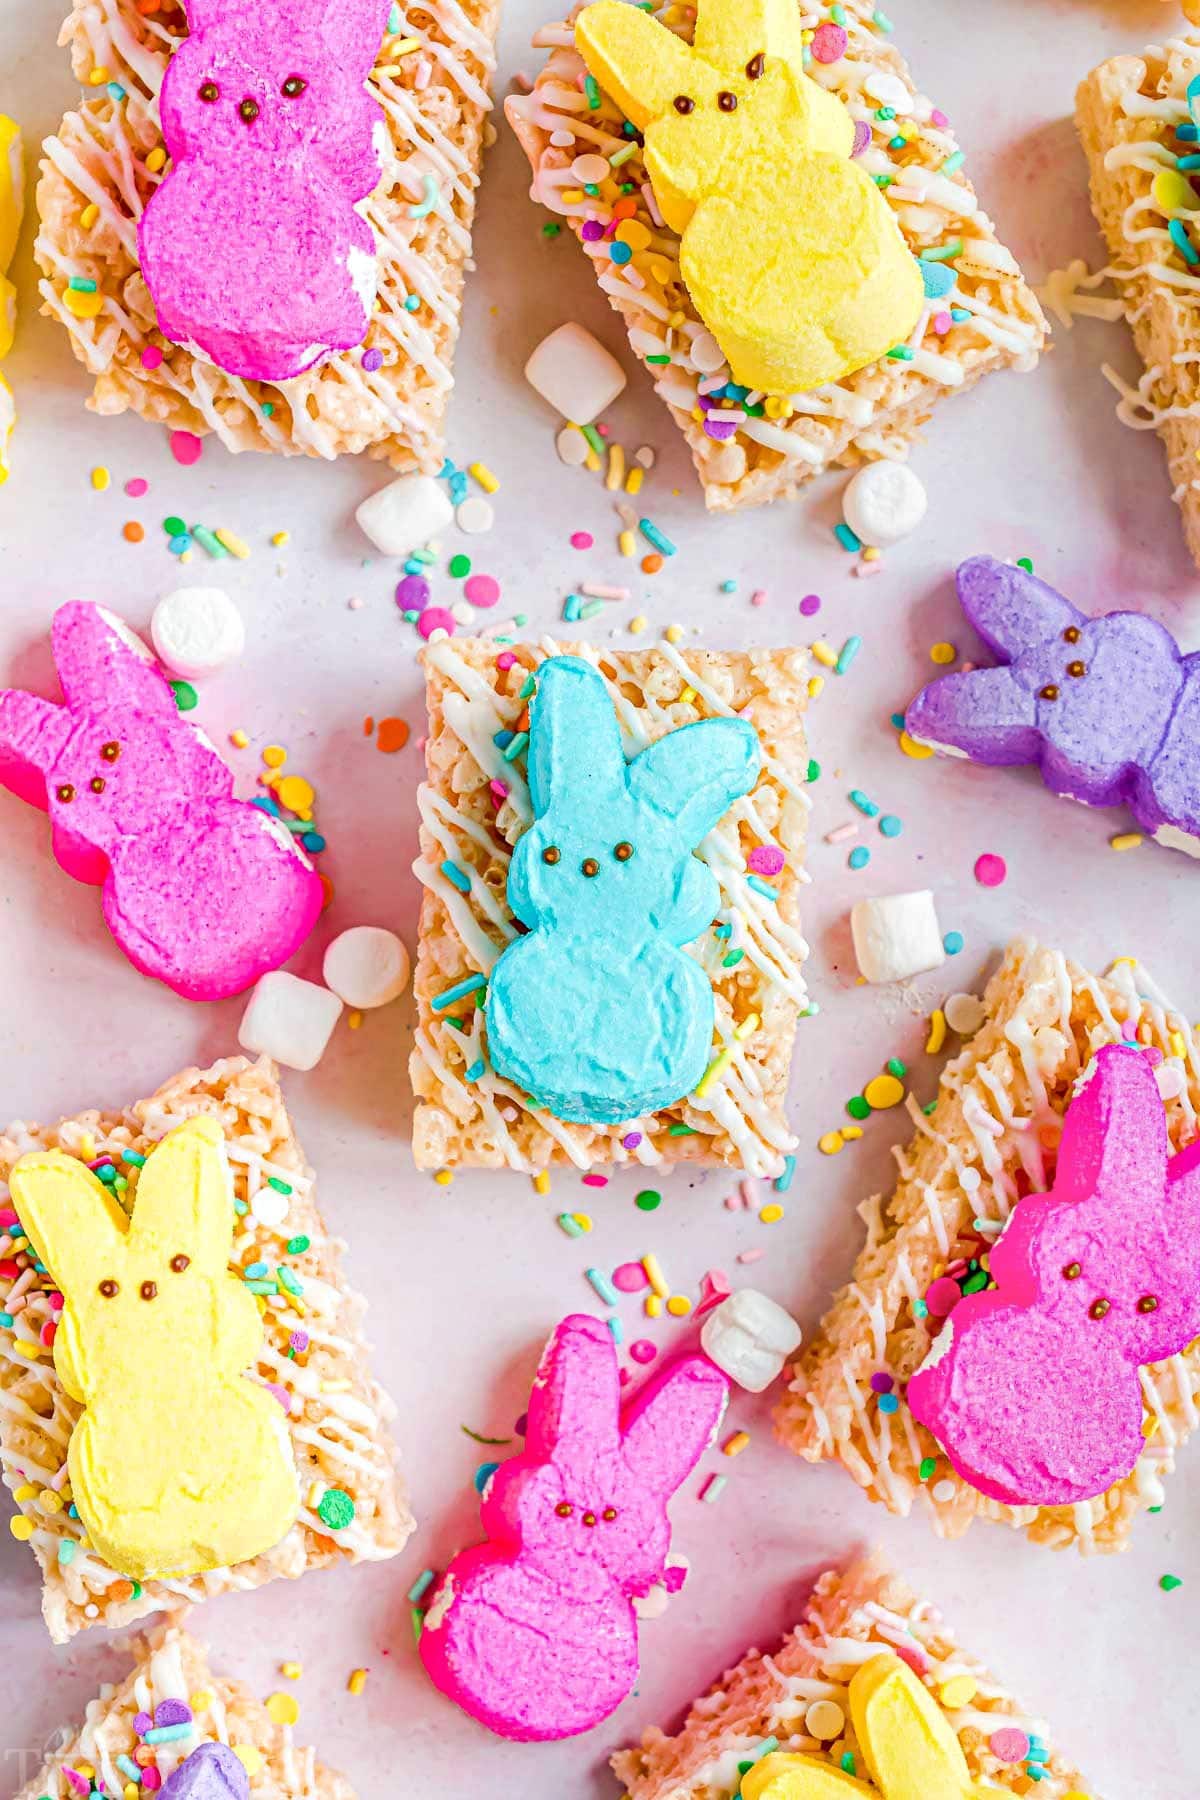 rice krispie treats decorated with white candy melts and sprinkles and topped with different colored Peeps. This is a top down view of the treats laid out on parchment paper.